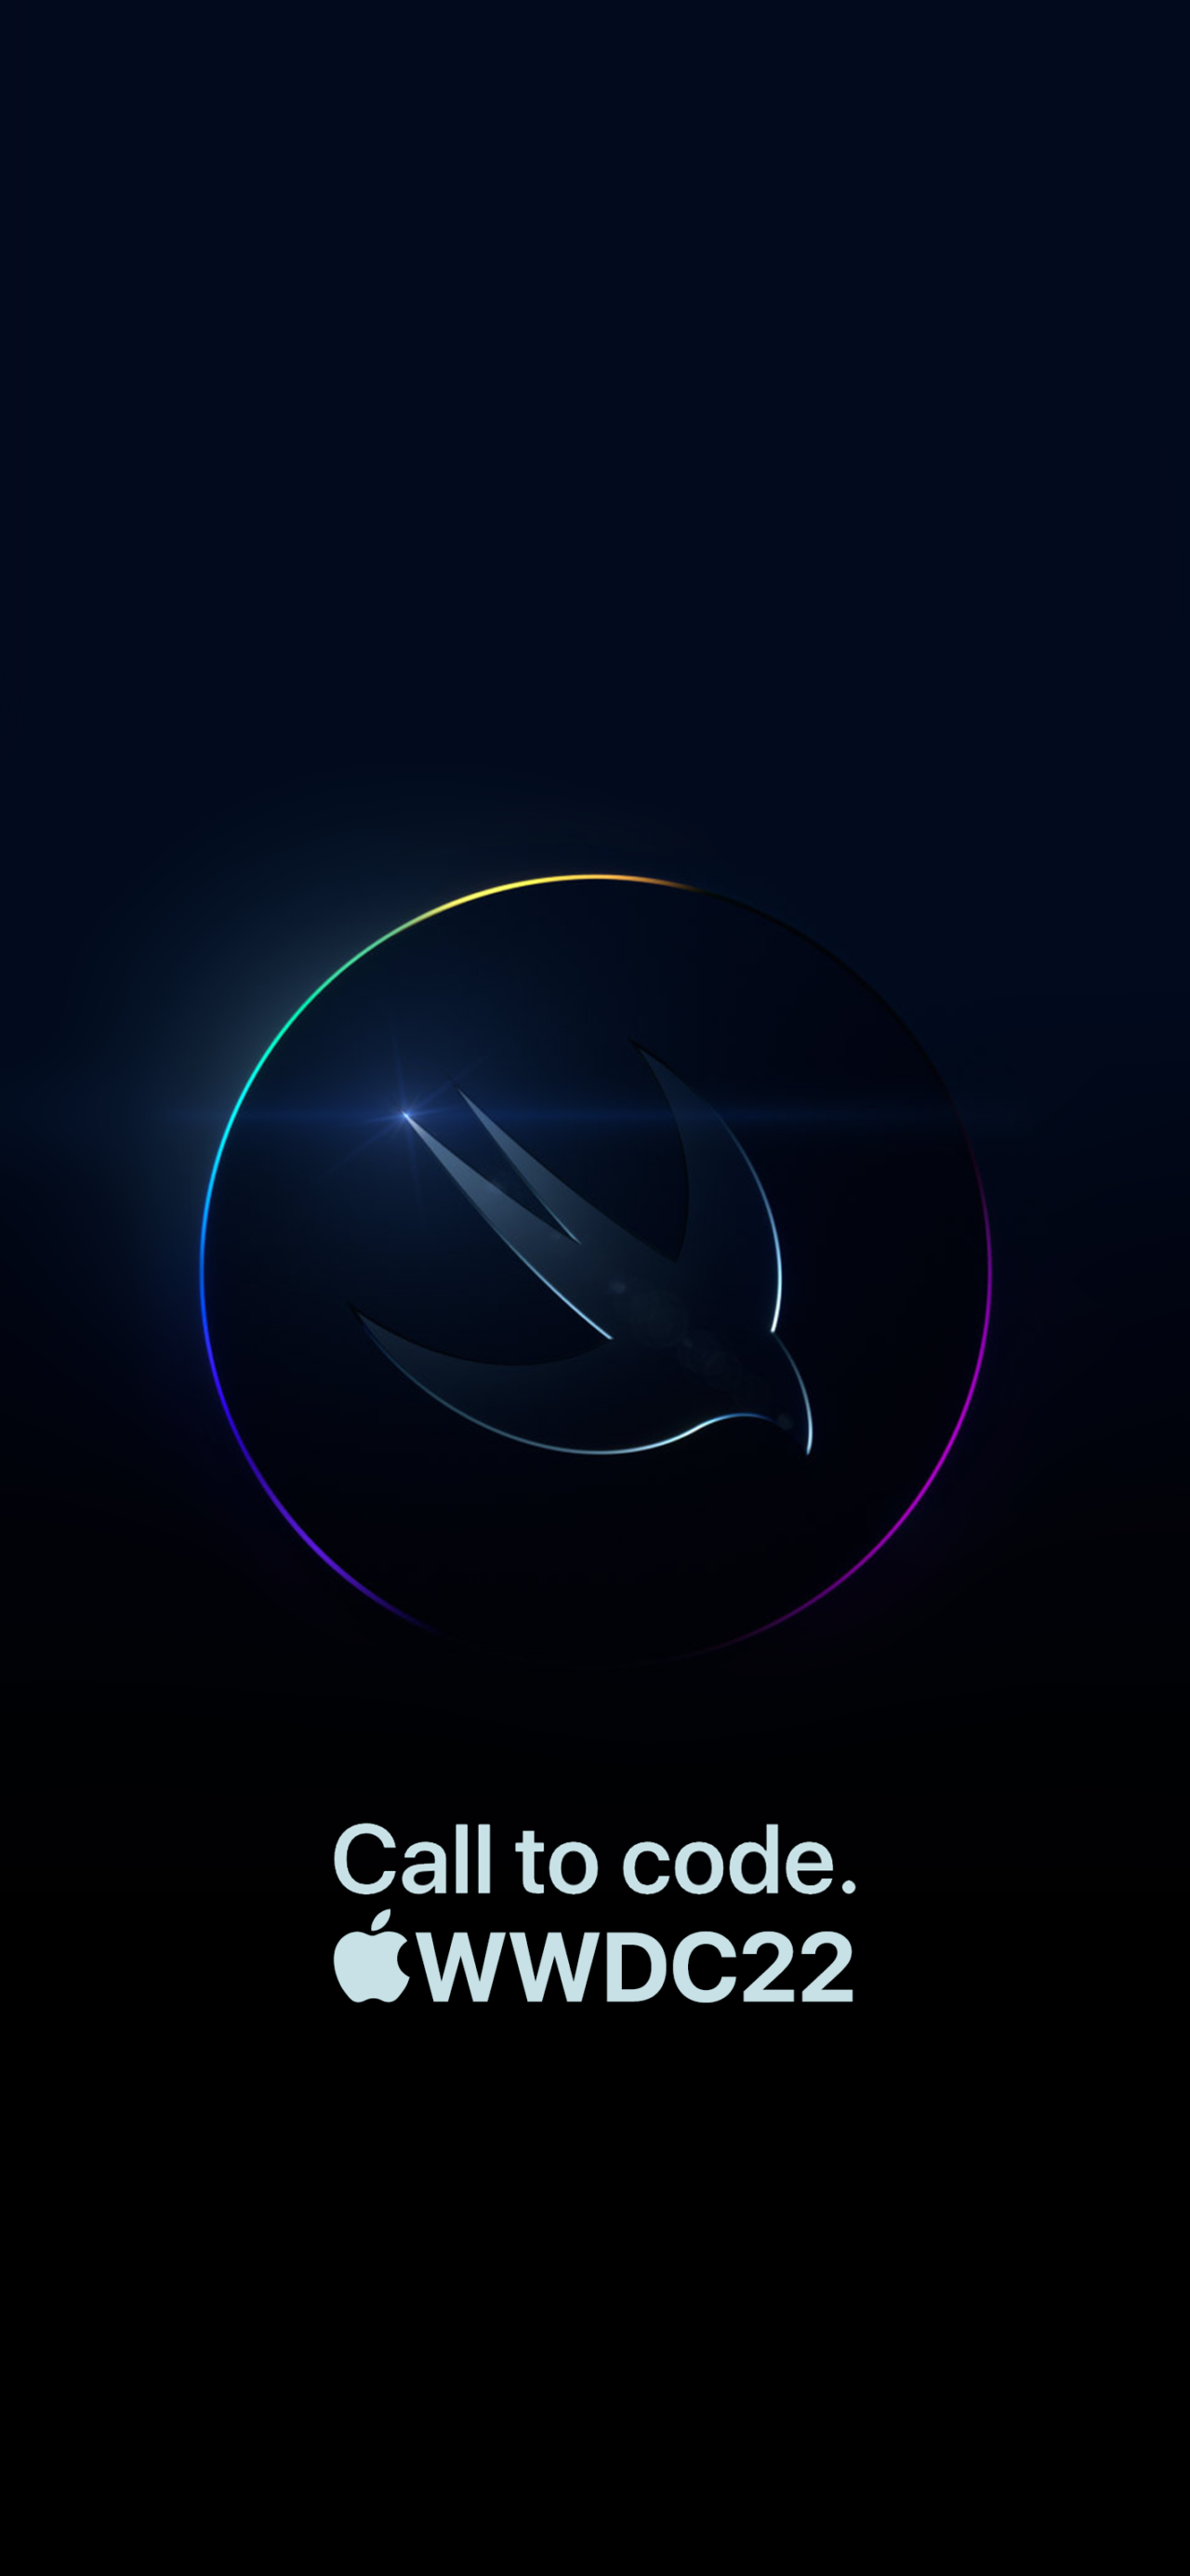 WWDC22 | LIVE Wallpaper - Wallpapers Central